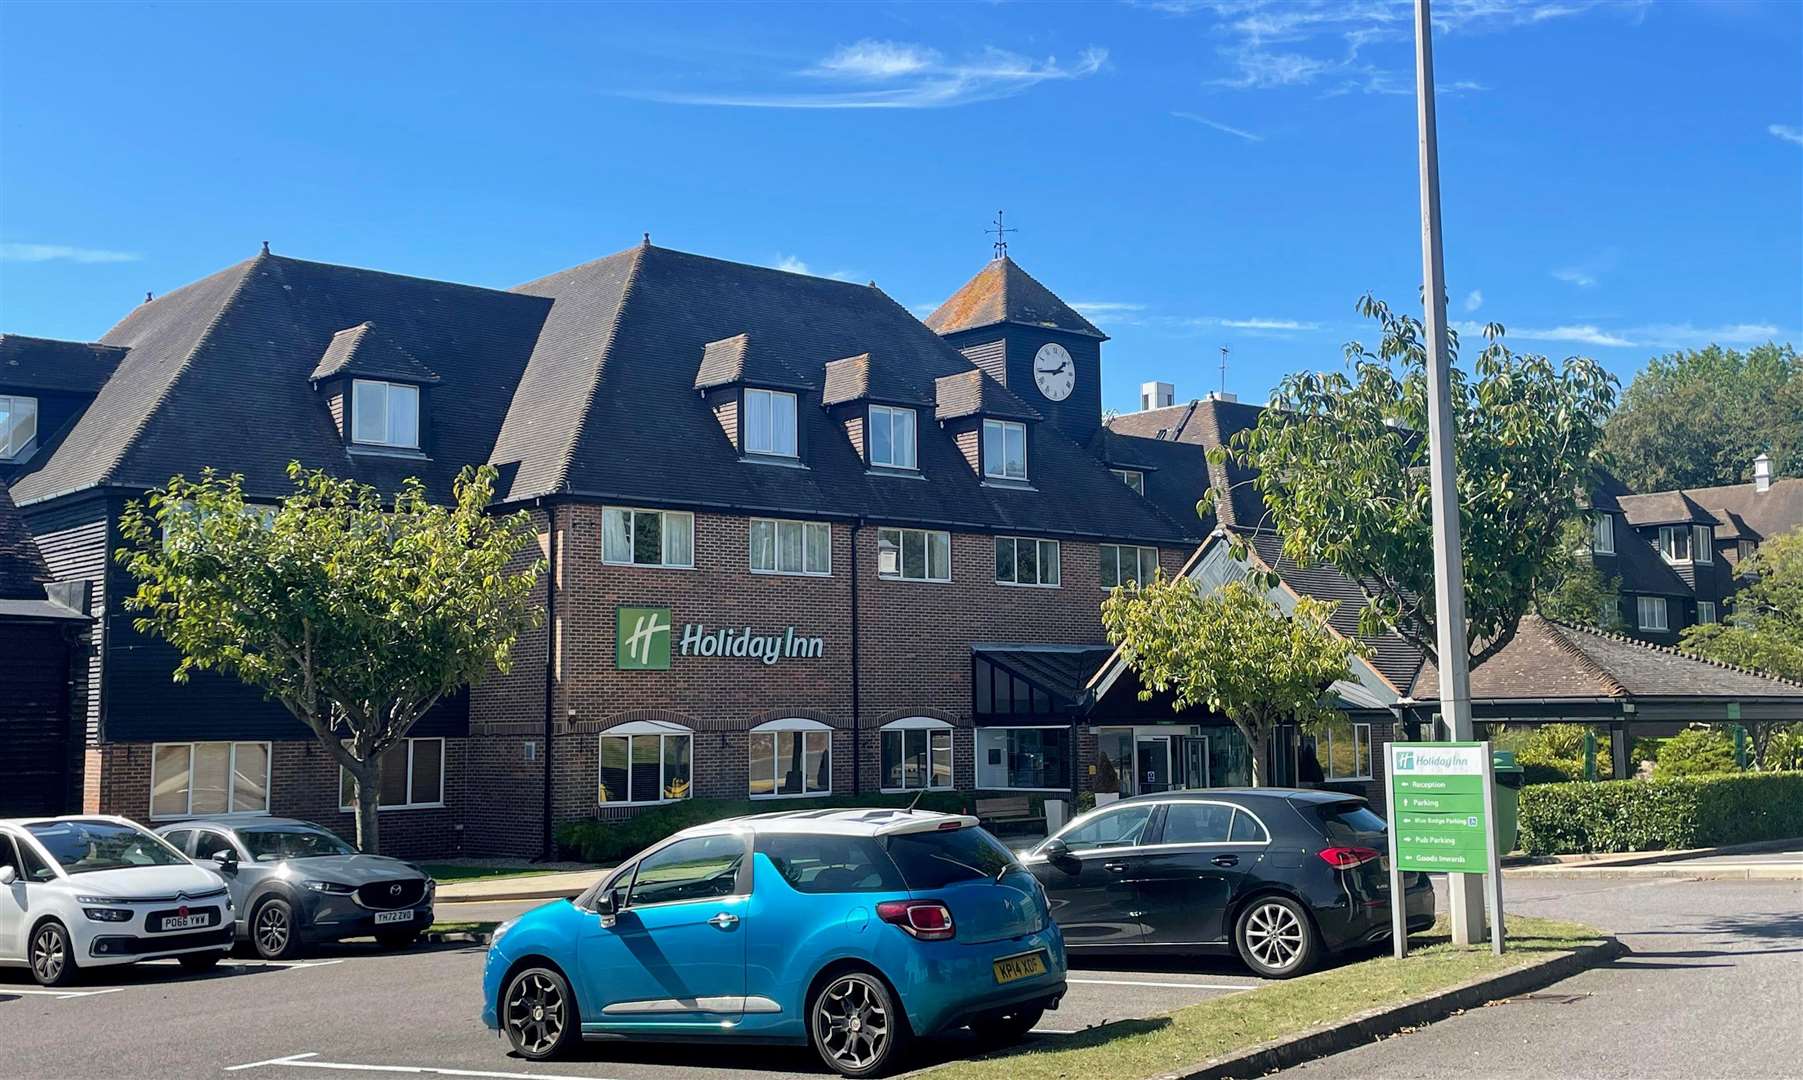 The Holiday Inn in Hothfield, near Ashford, is set to reopen to the public after two years being used to house Afghan refugees